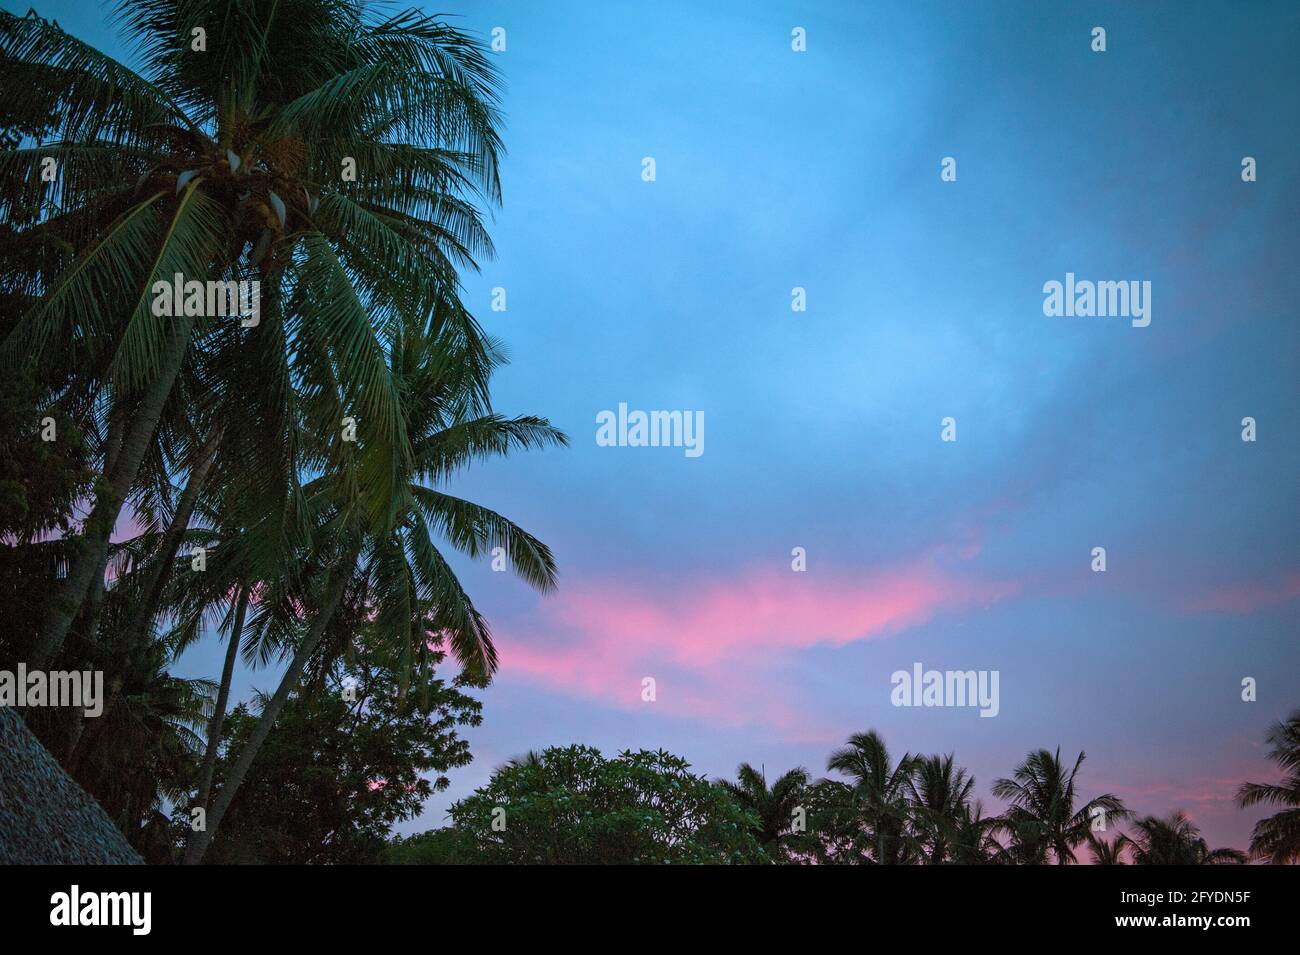 Tropical sunset and palm trees in Costa Rica Stock Photo